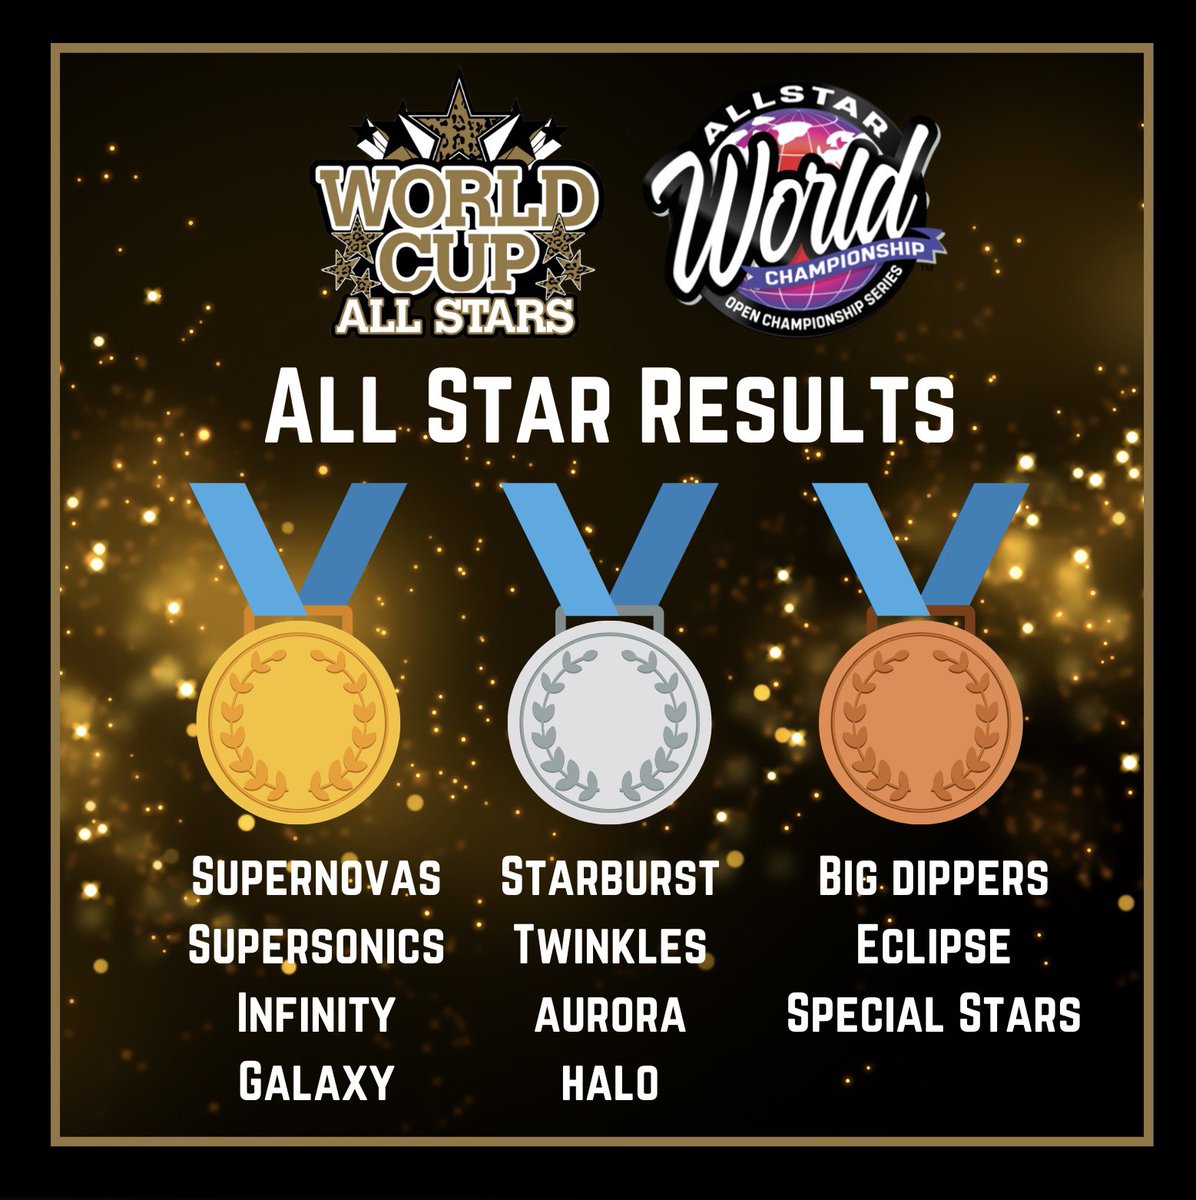 What a successful showing we had at All Star Worlds!